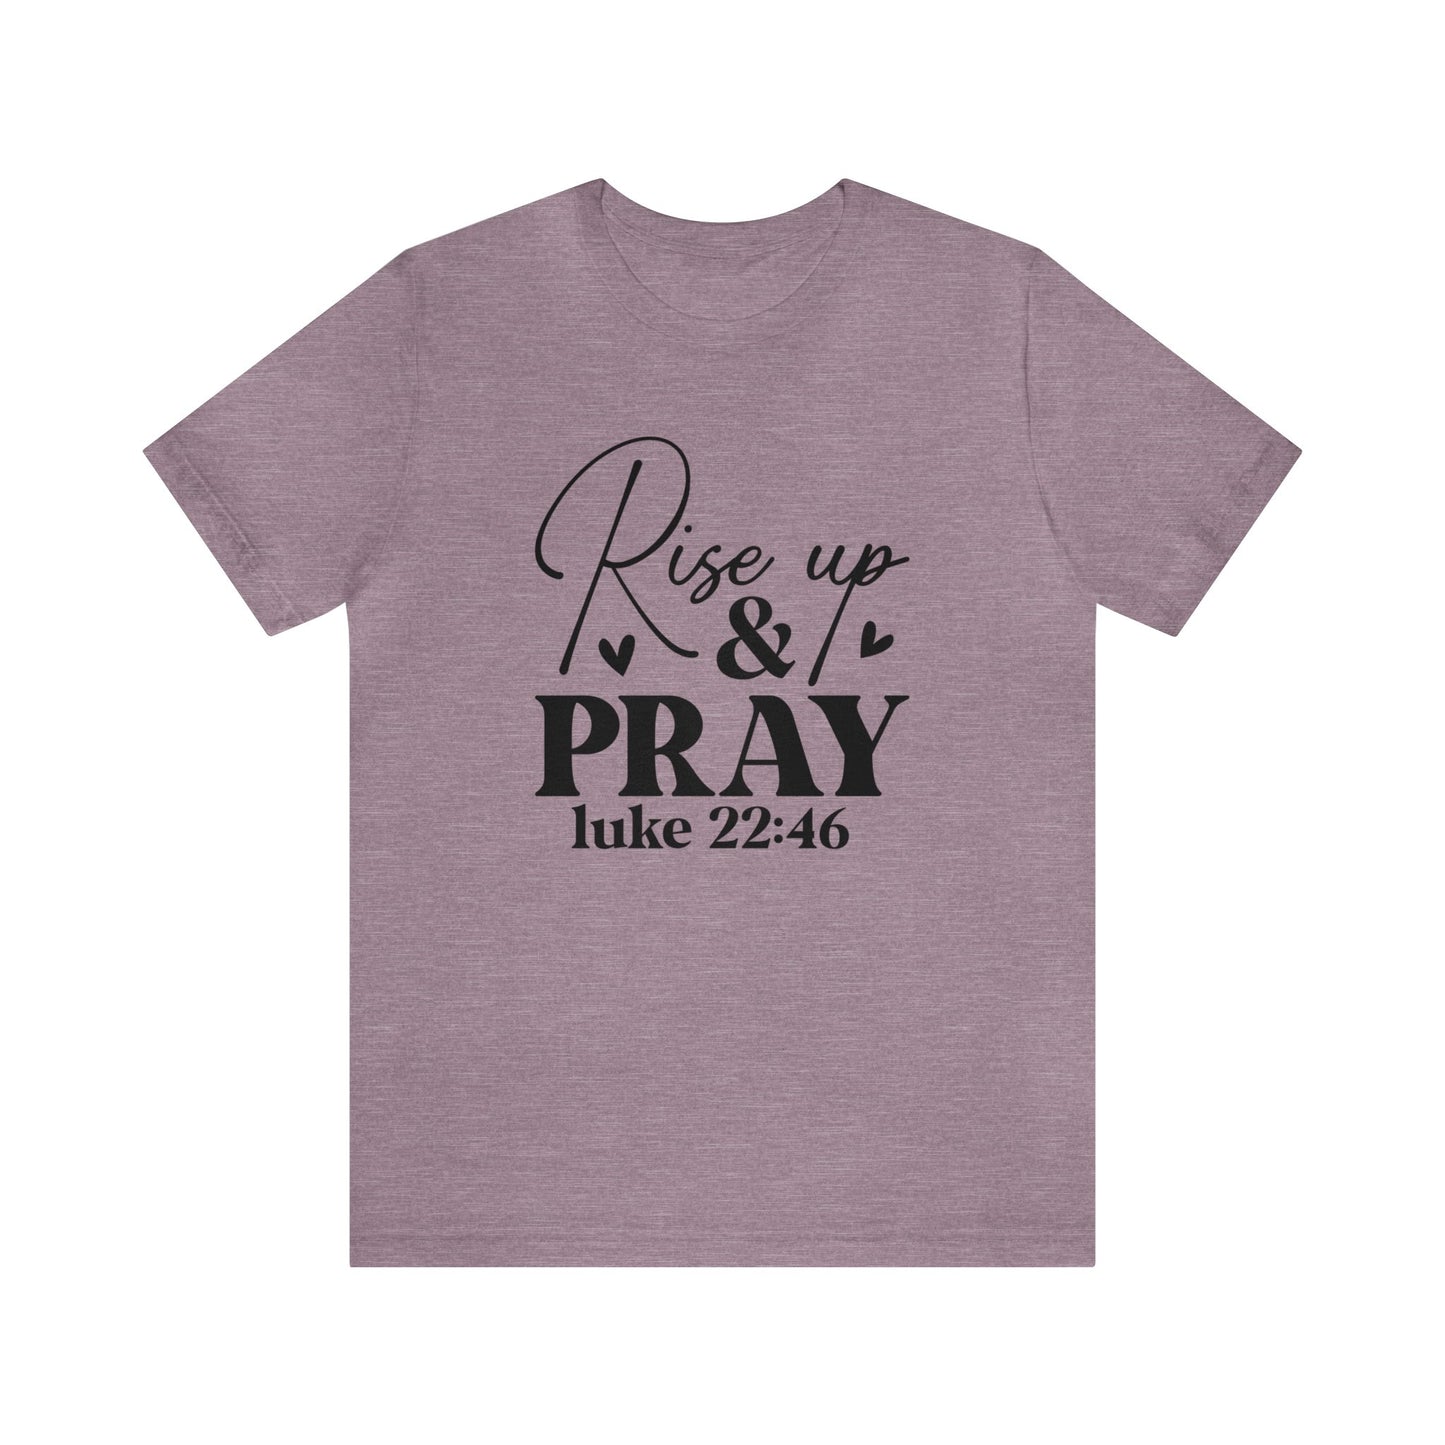 Rise Up and Pray Women's Short Sleeve Tee